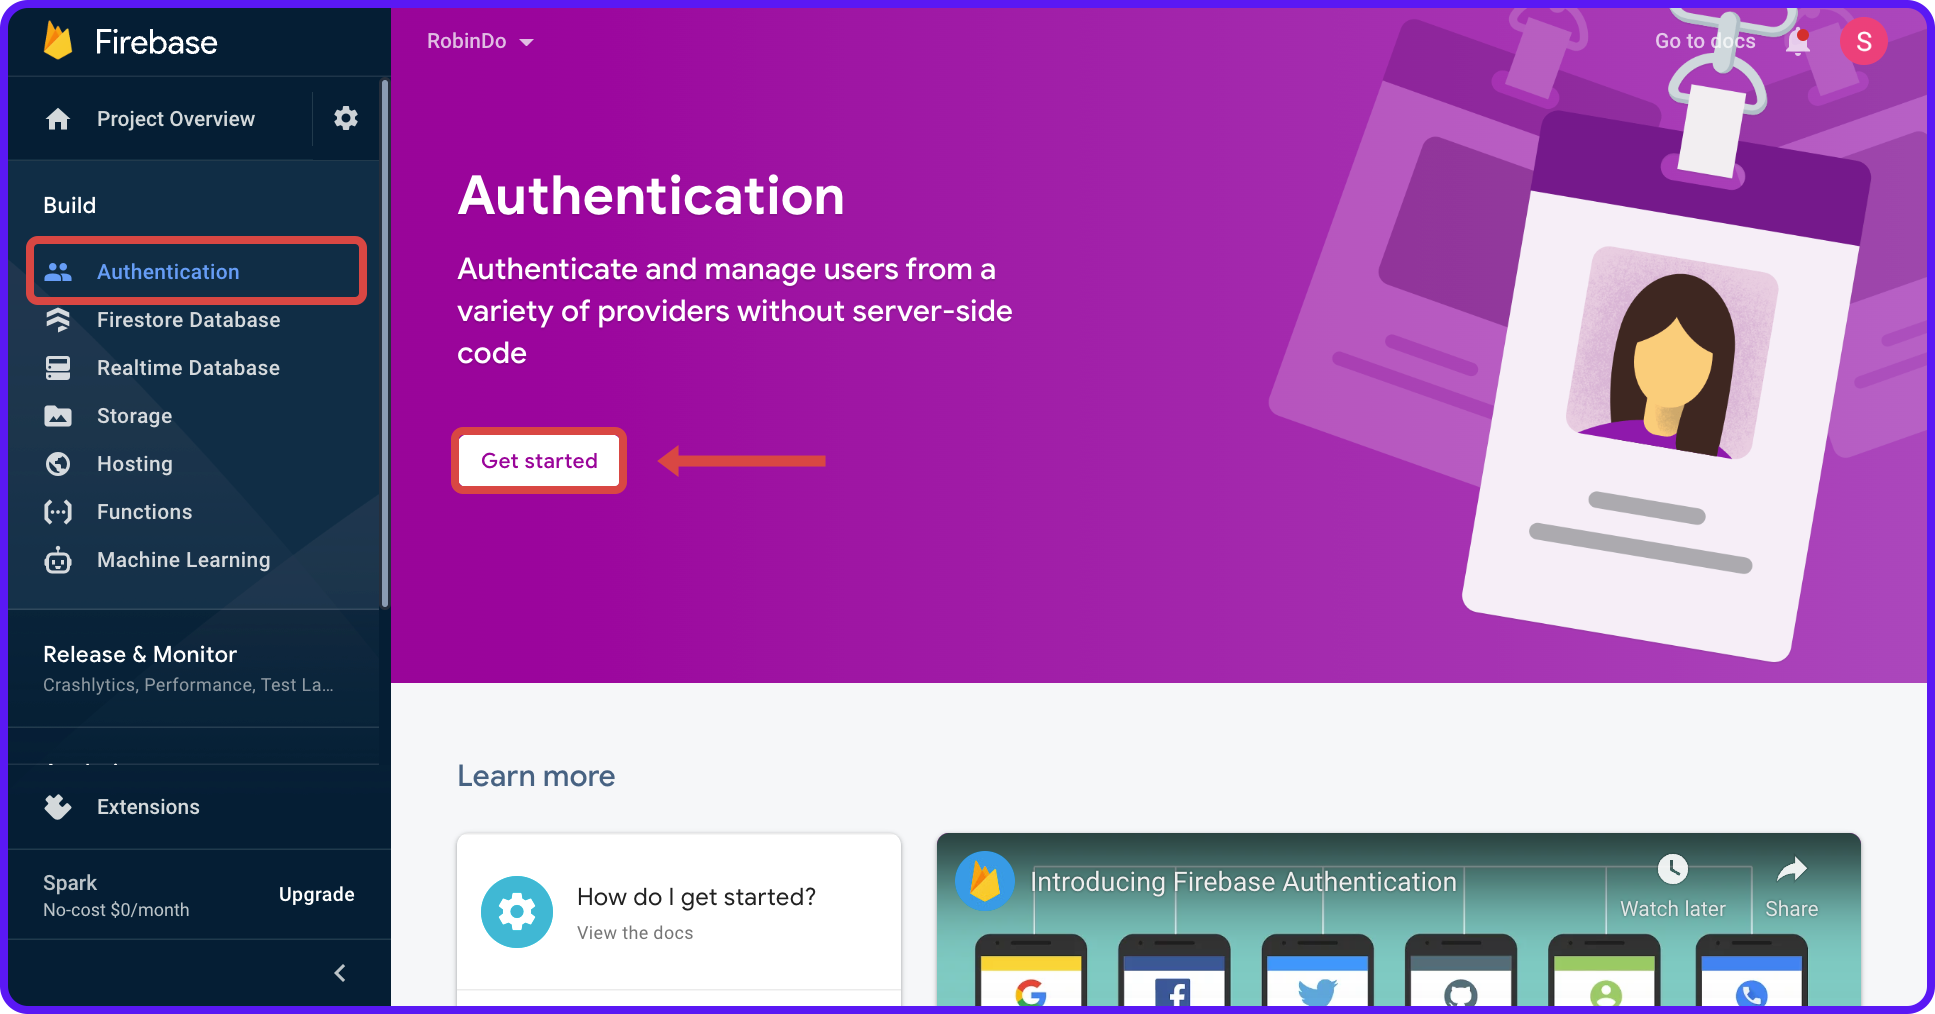 Get started button of the Firebase Authentication page